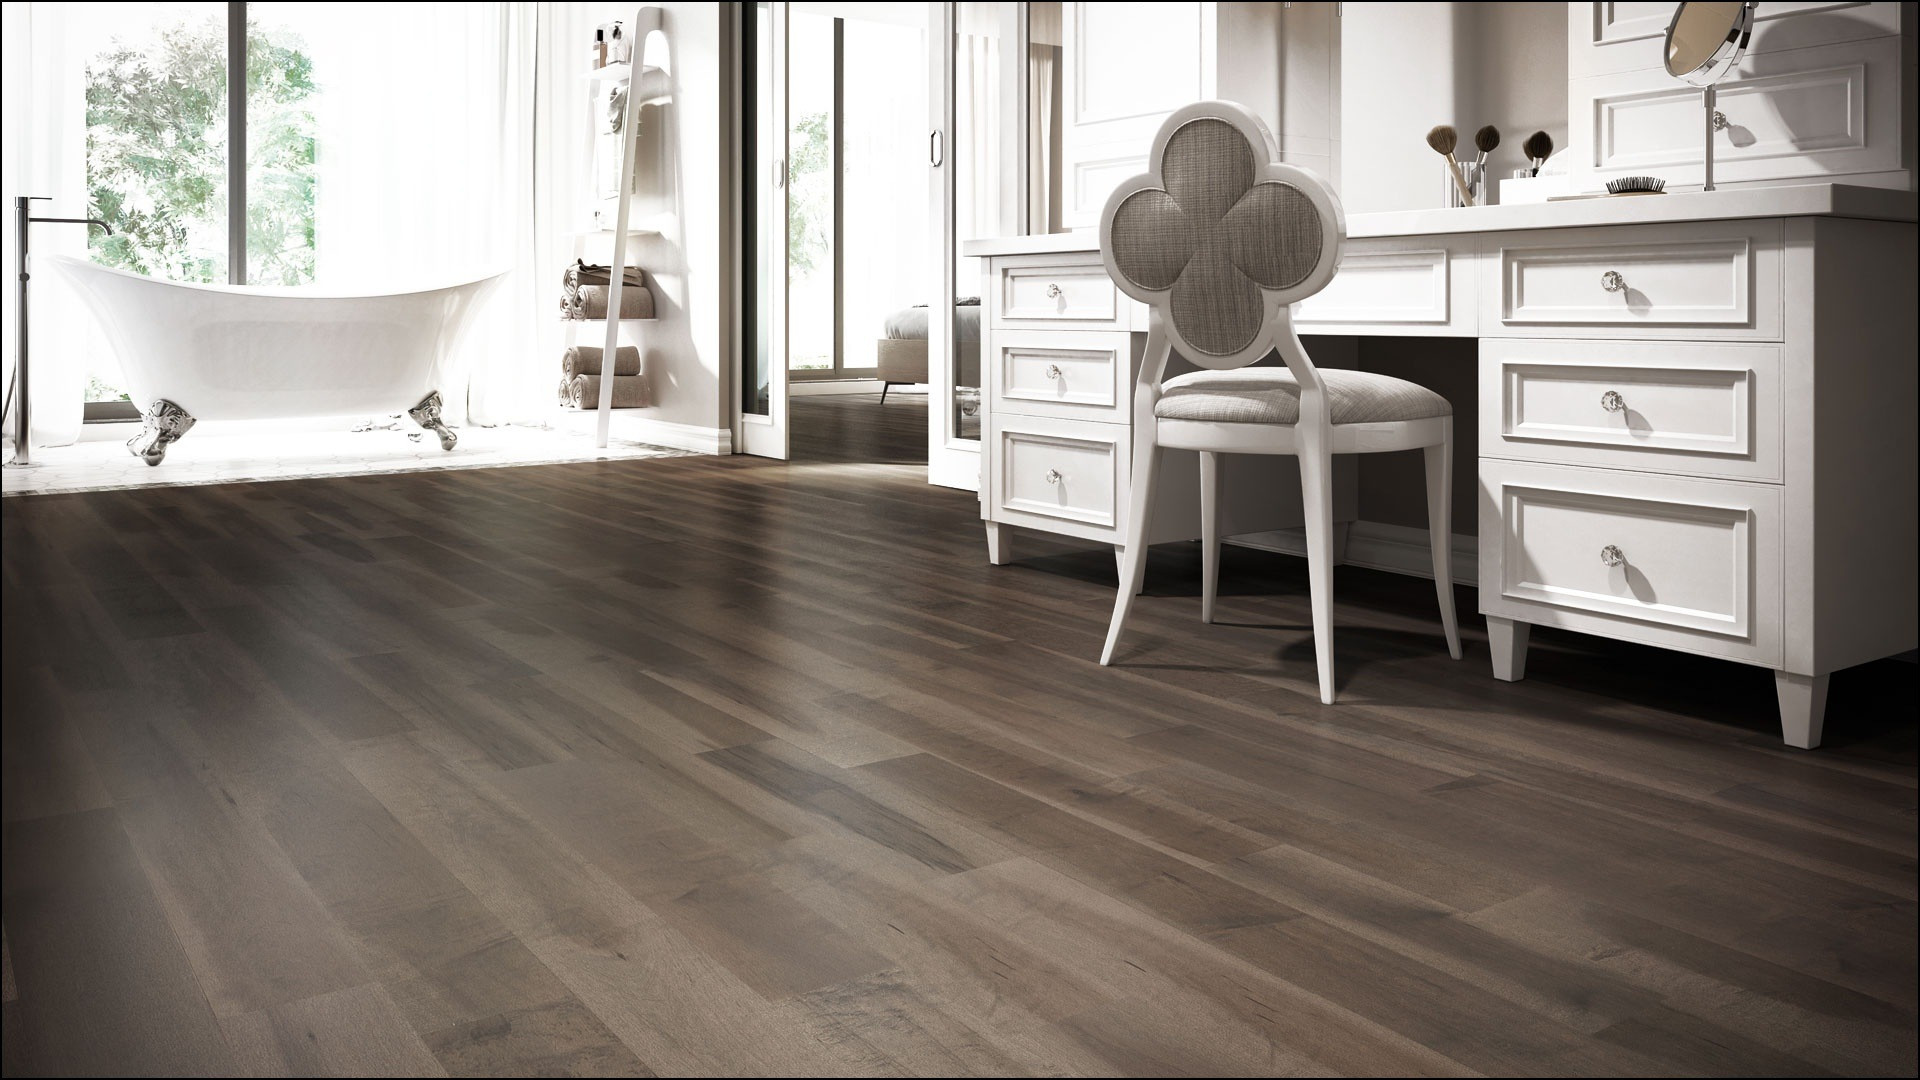 18 Unique Kahrs Engineered Hardwood Flooring Reviews 2023 free download kahrs engineered hardwood flooring reviews of hardwood flooring suppliers france flooring ideas within hardwood flooring pictures in homes images black and white laminate flooring beautiful 